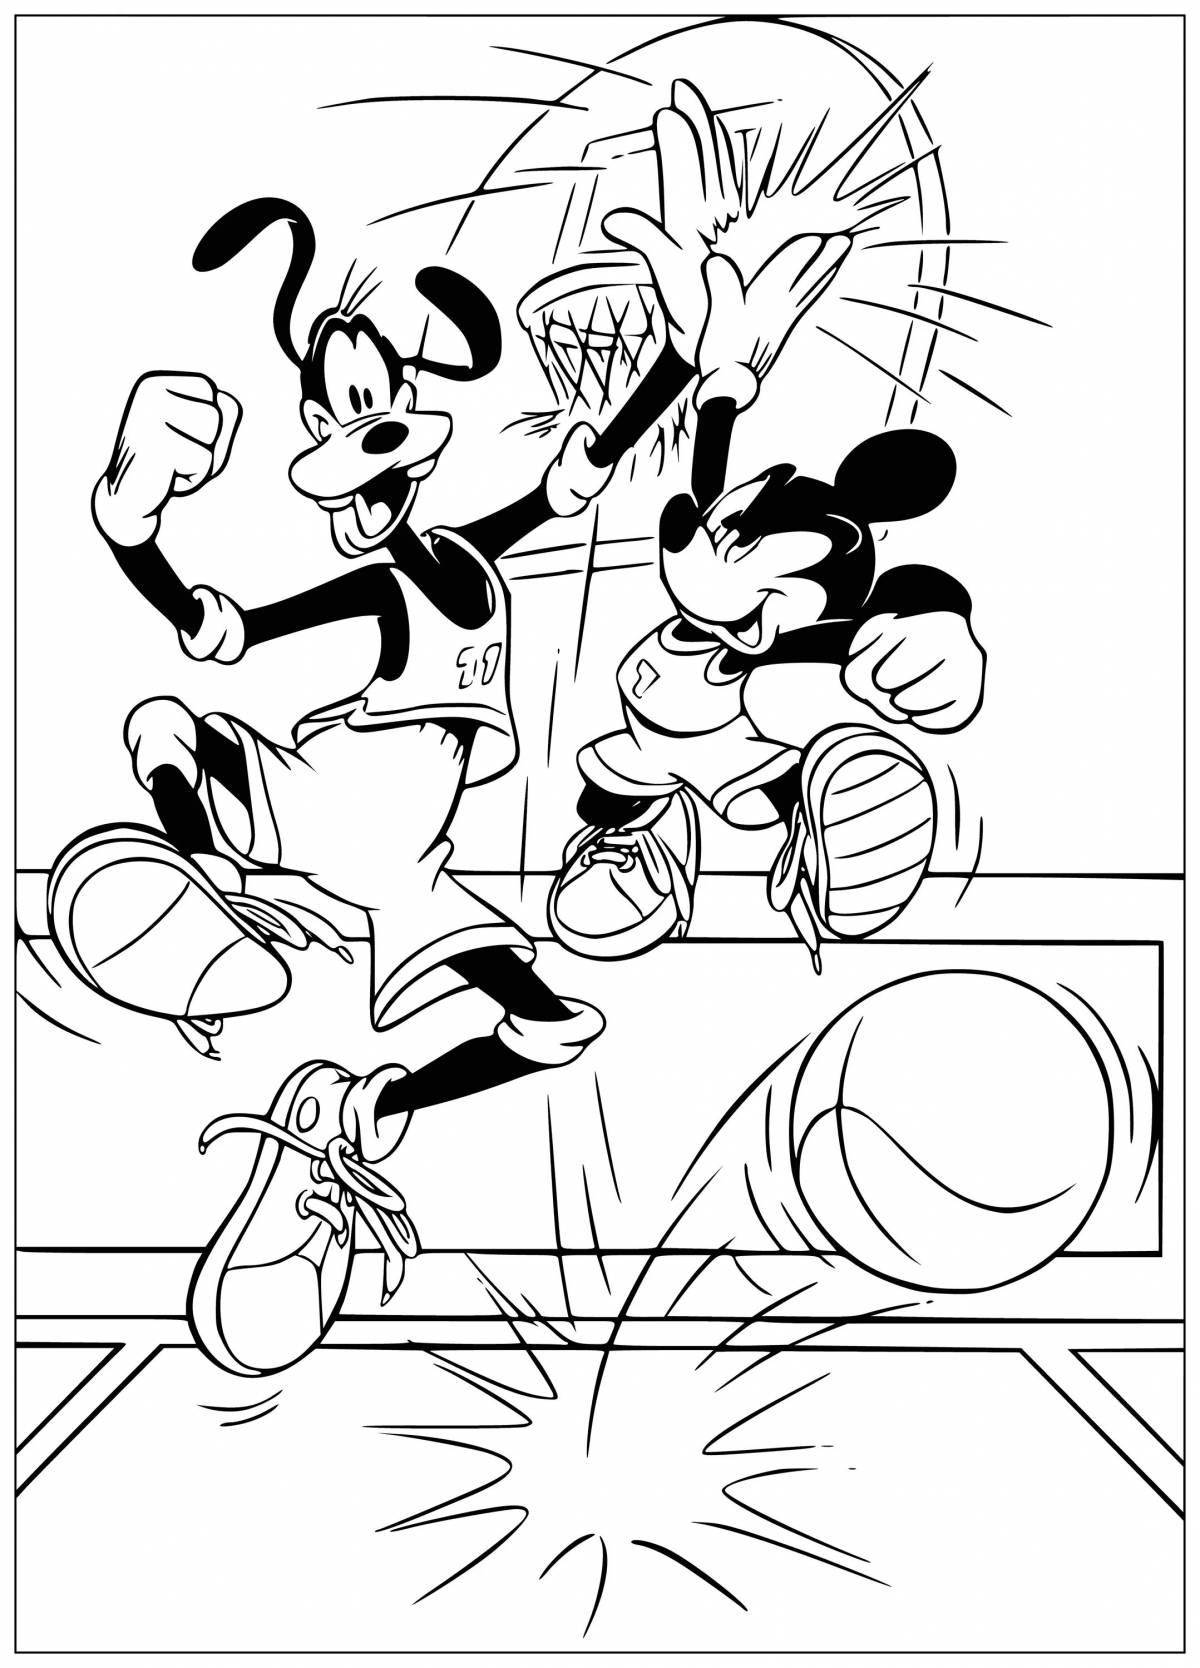 Mickey's adorable coloring game